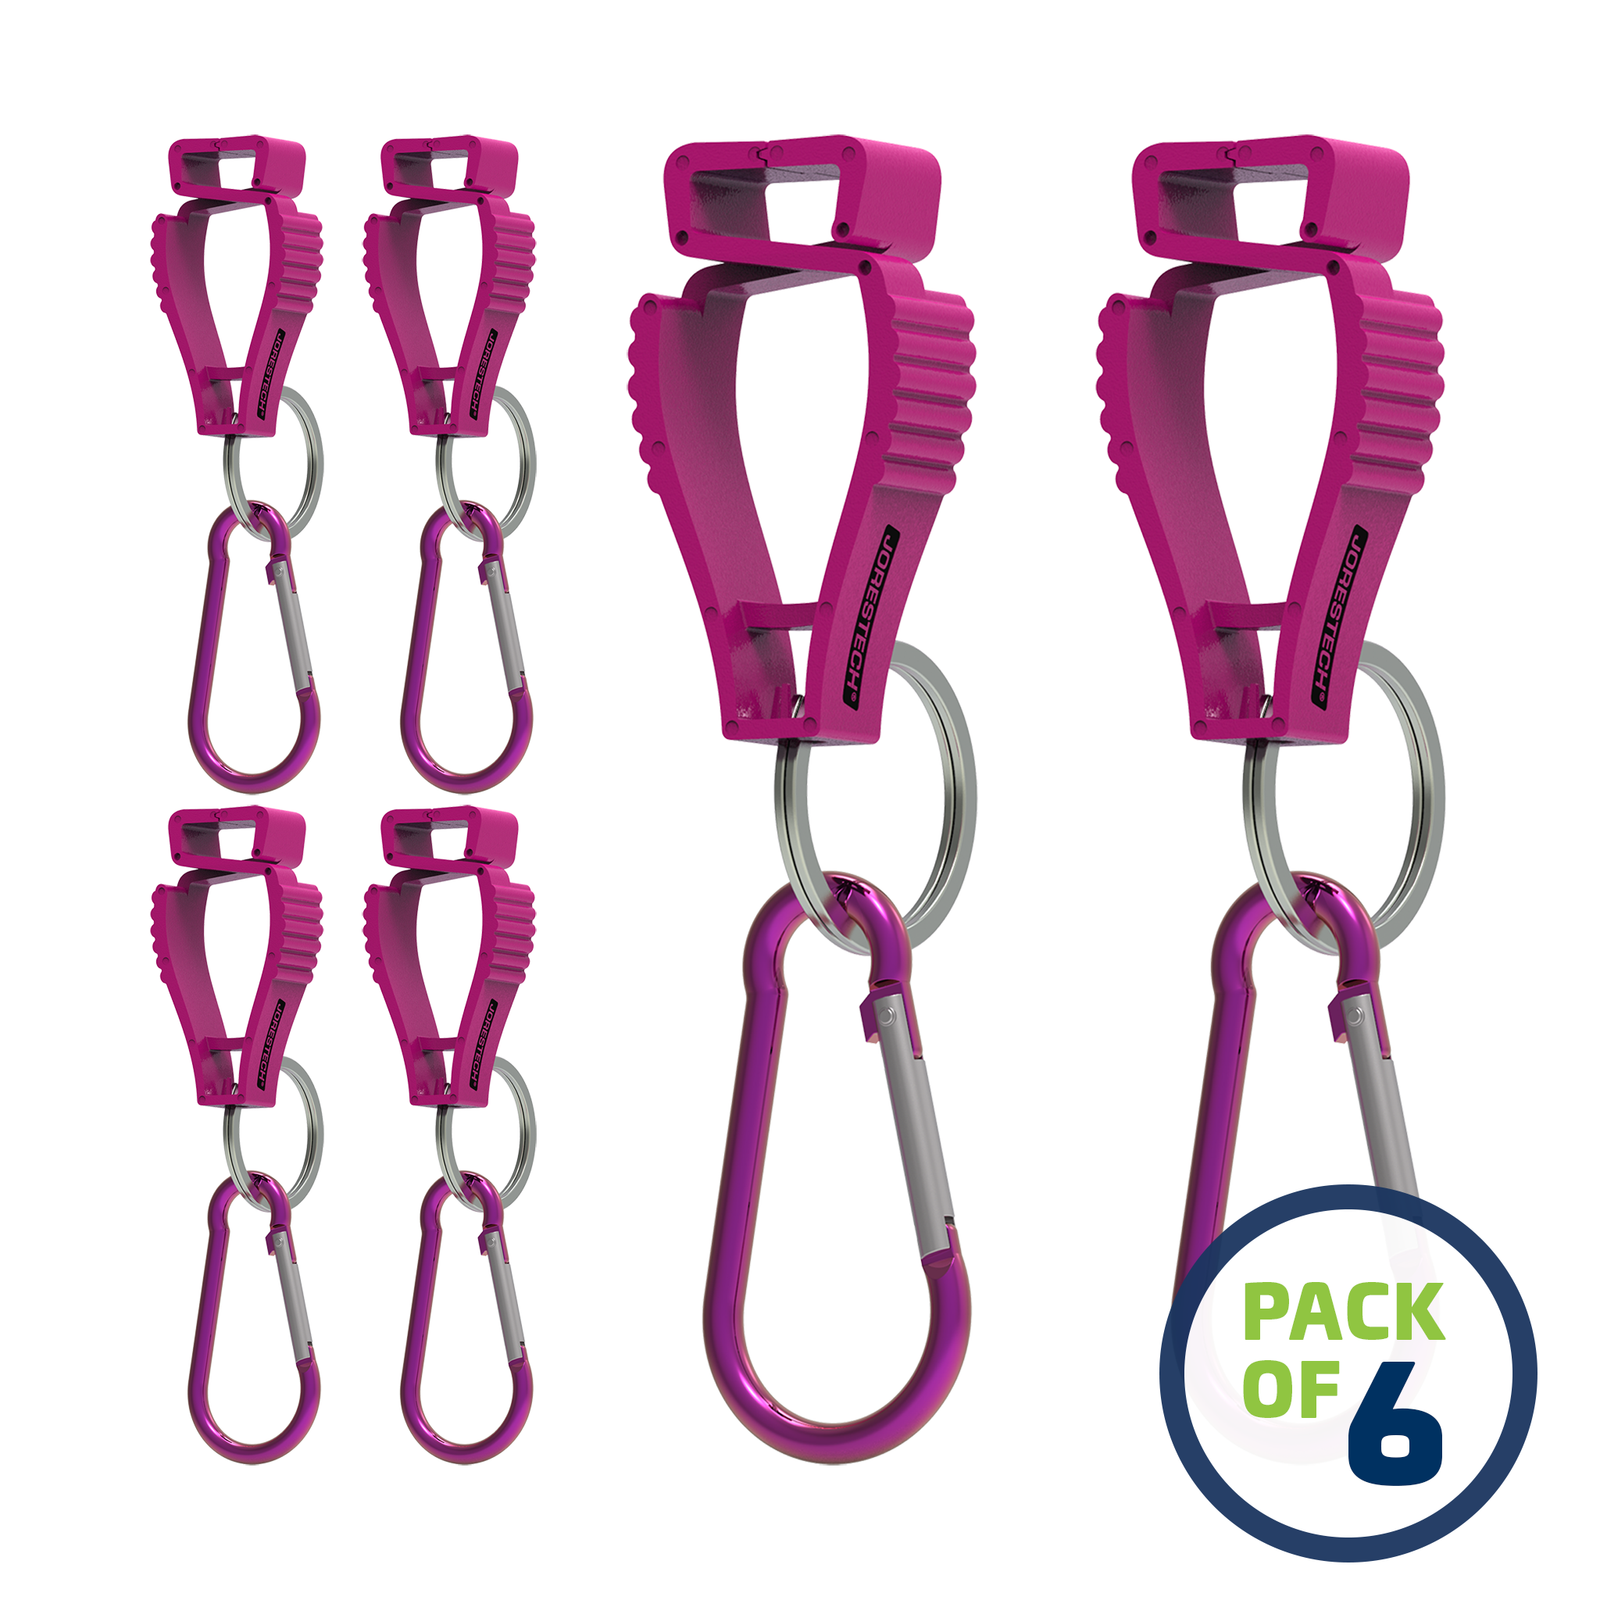 image of a pack of 6 Pink JORESTECH glove clip safety holders with carabiner over white background